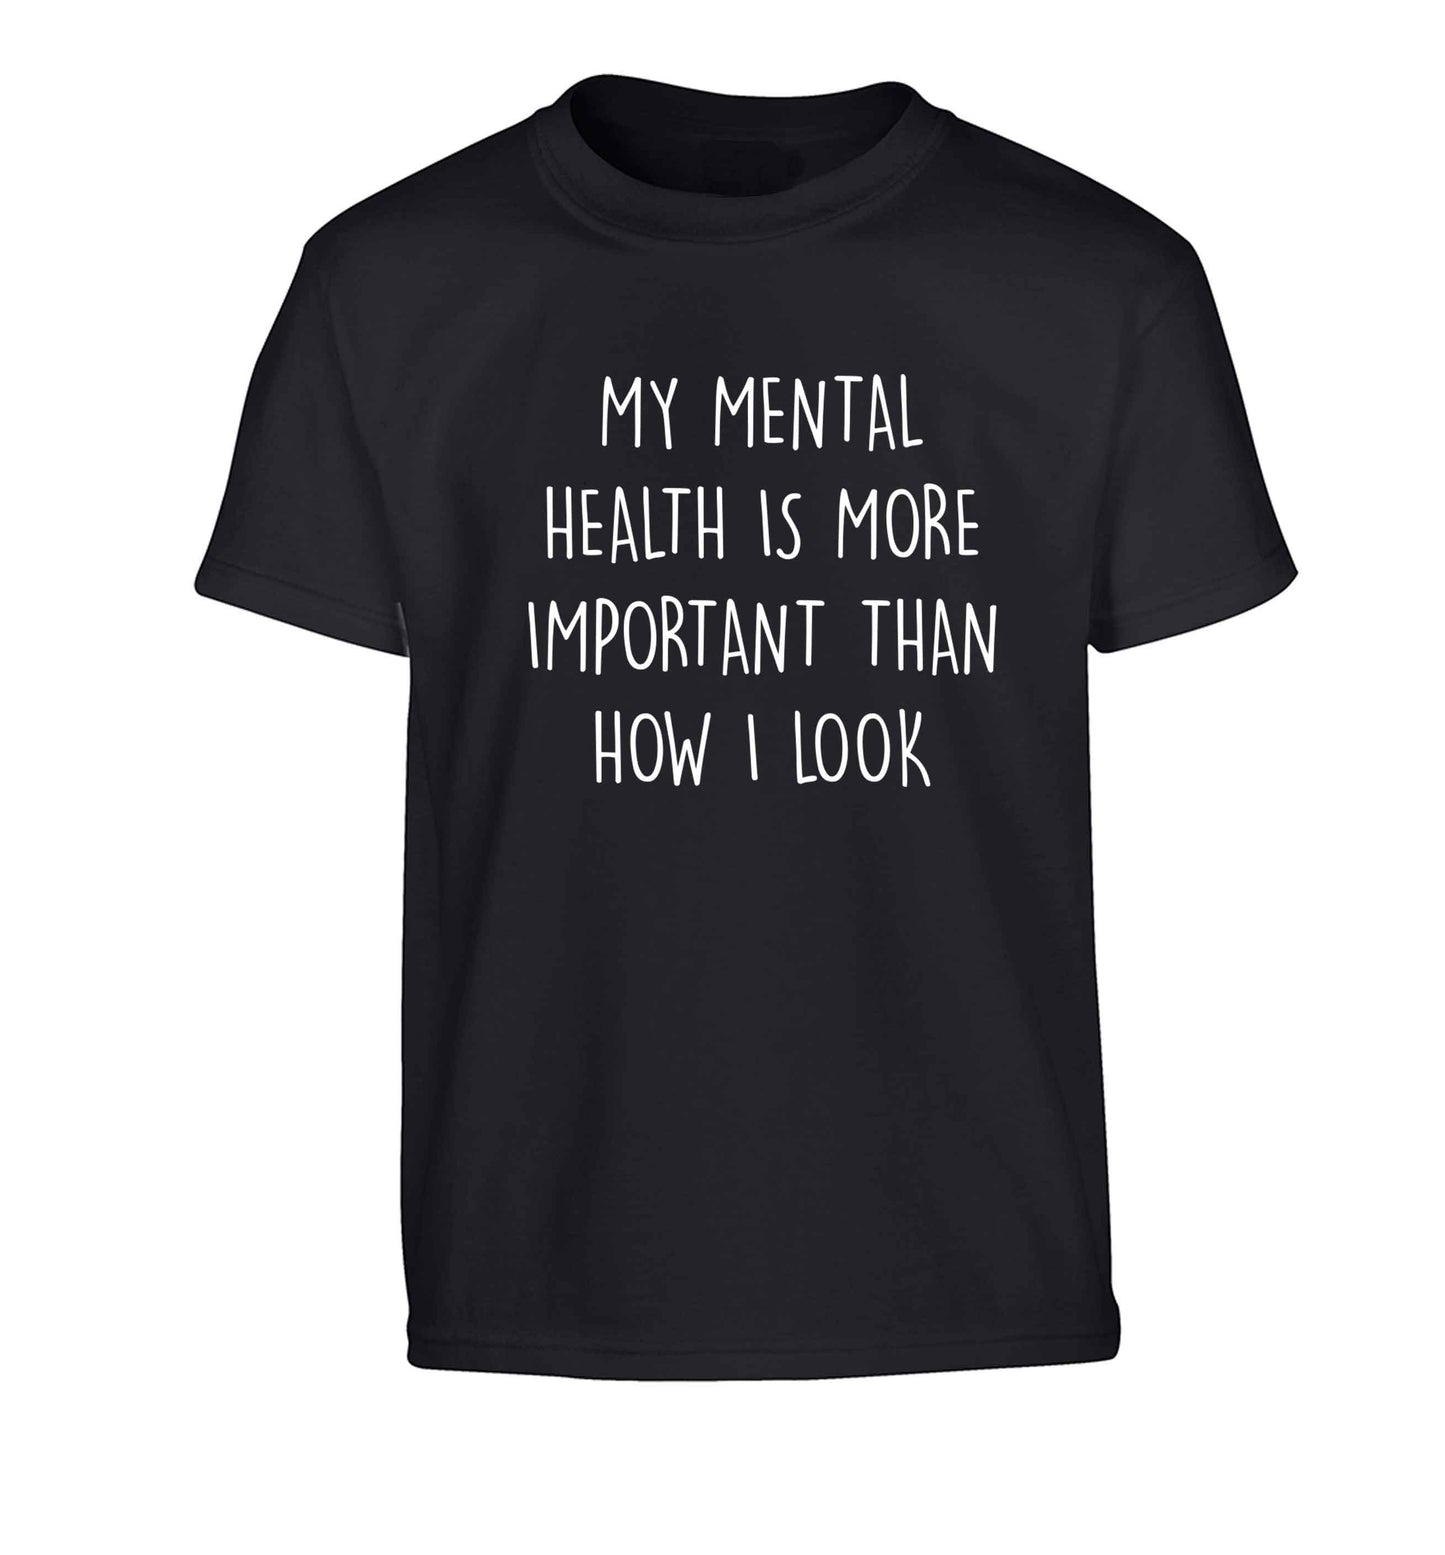 My mental health is more importnat than how I look Children's black Tshirt 12-13 Years